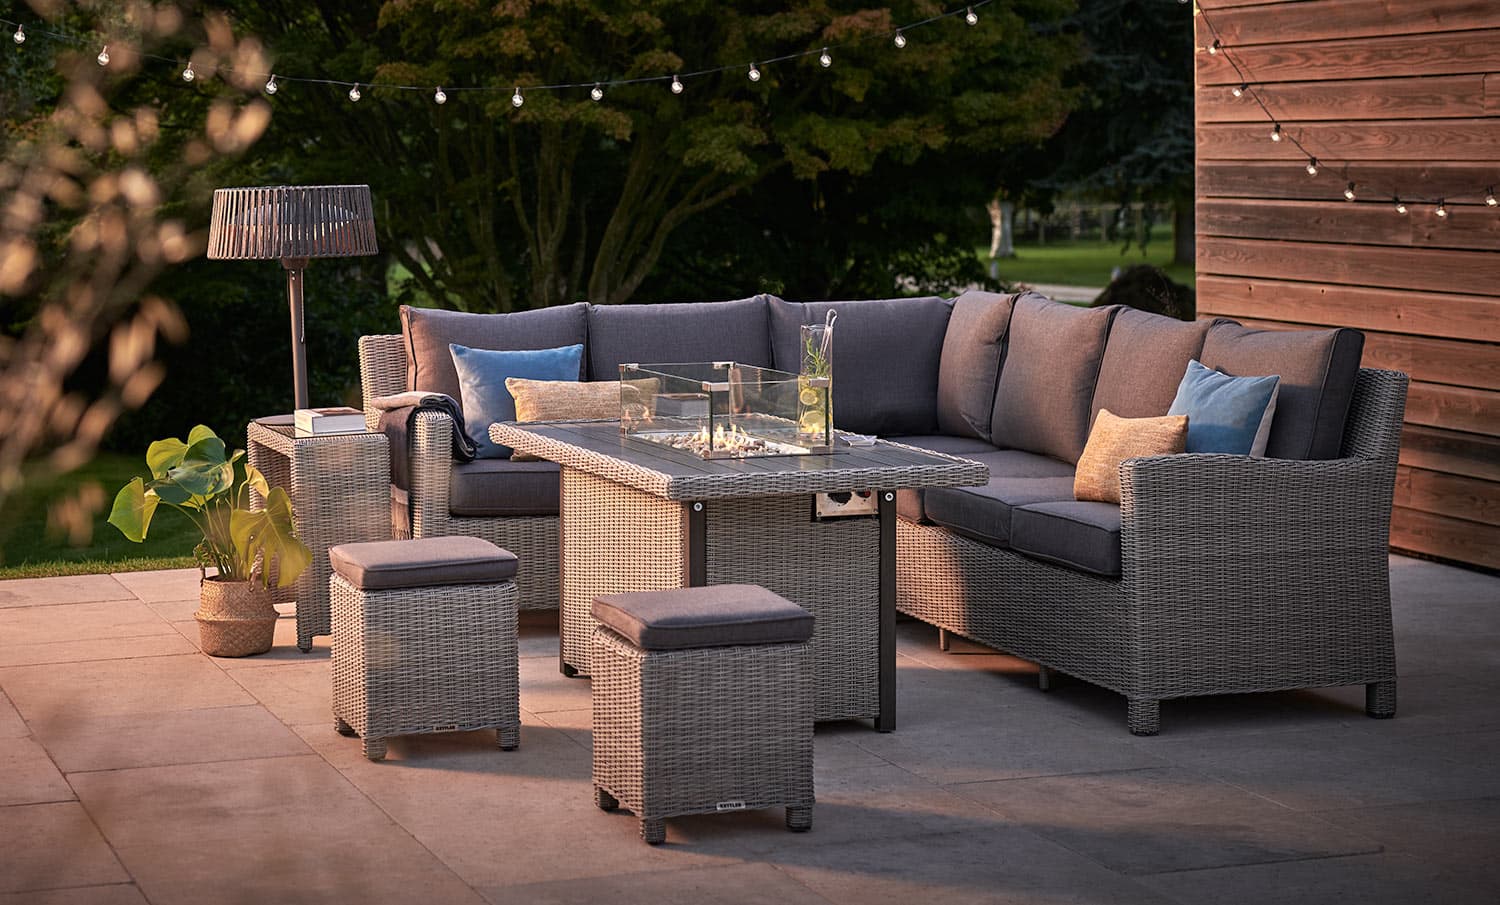 Palma Corner Set Casual Dining Garden, Garden Furniture With Fire Pit In Middle Of Table